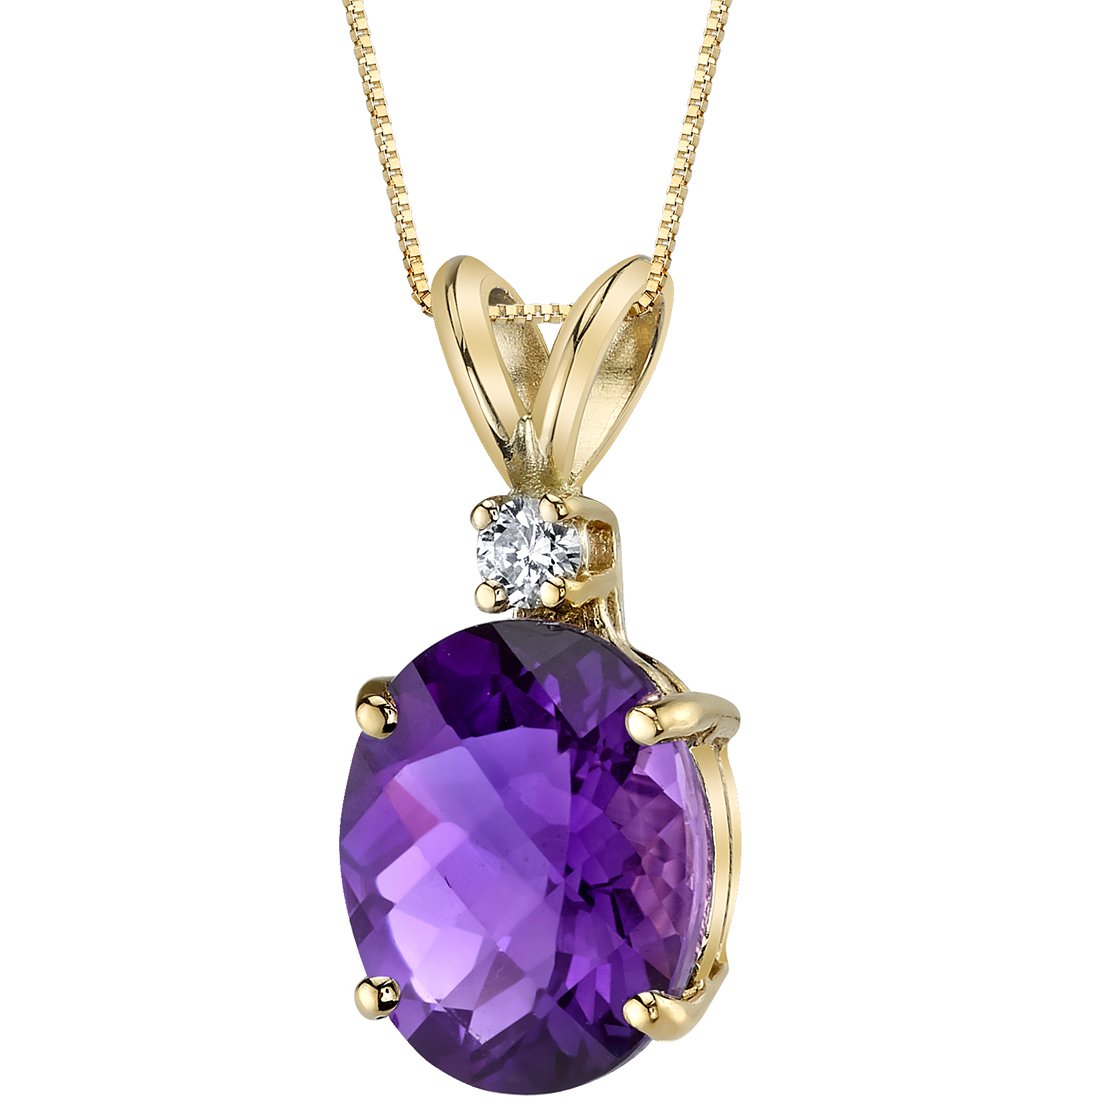 Peora Amethyst with Genuine Diamond Pendant in 14K Yellow Gold, Elegant Solitaire, Oval Shape, 10x8mm, 2 Carats total